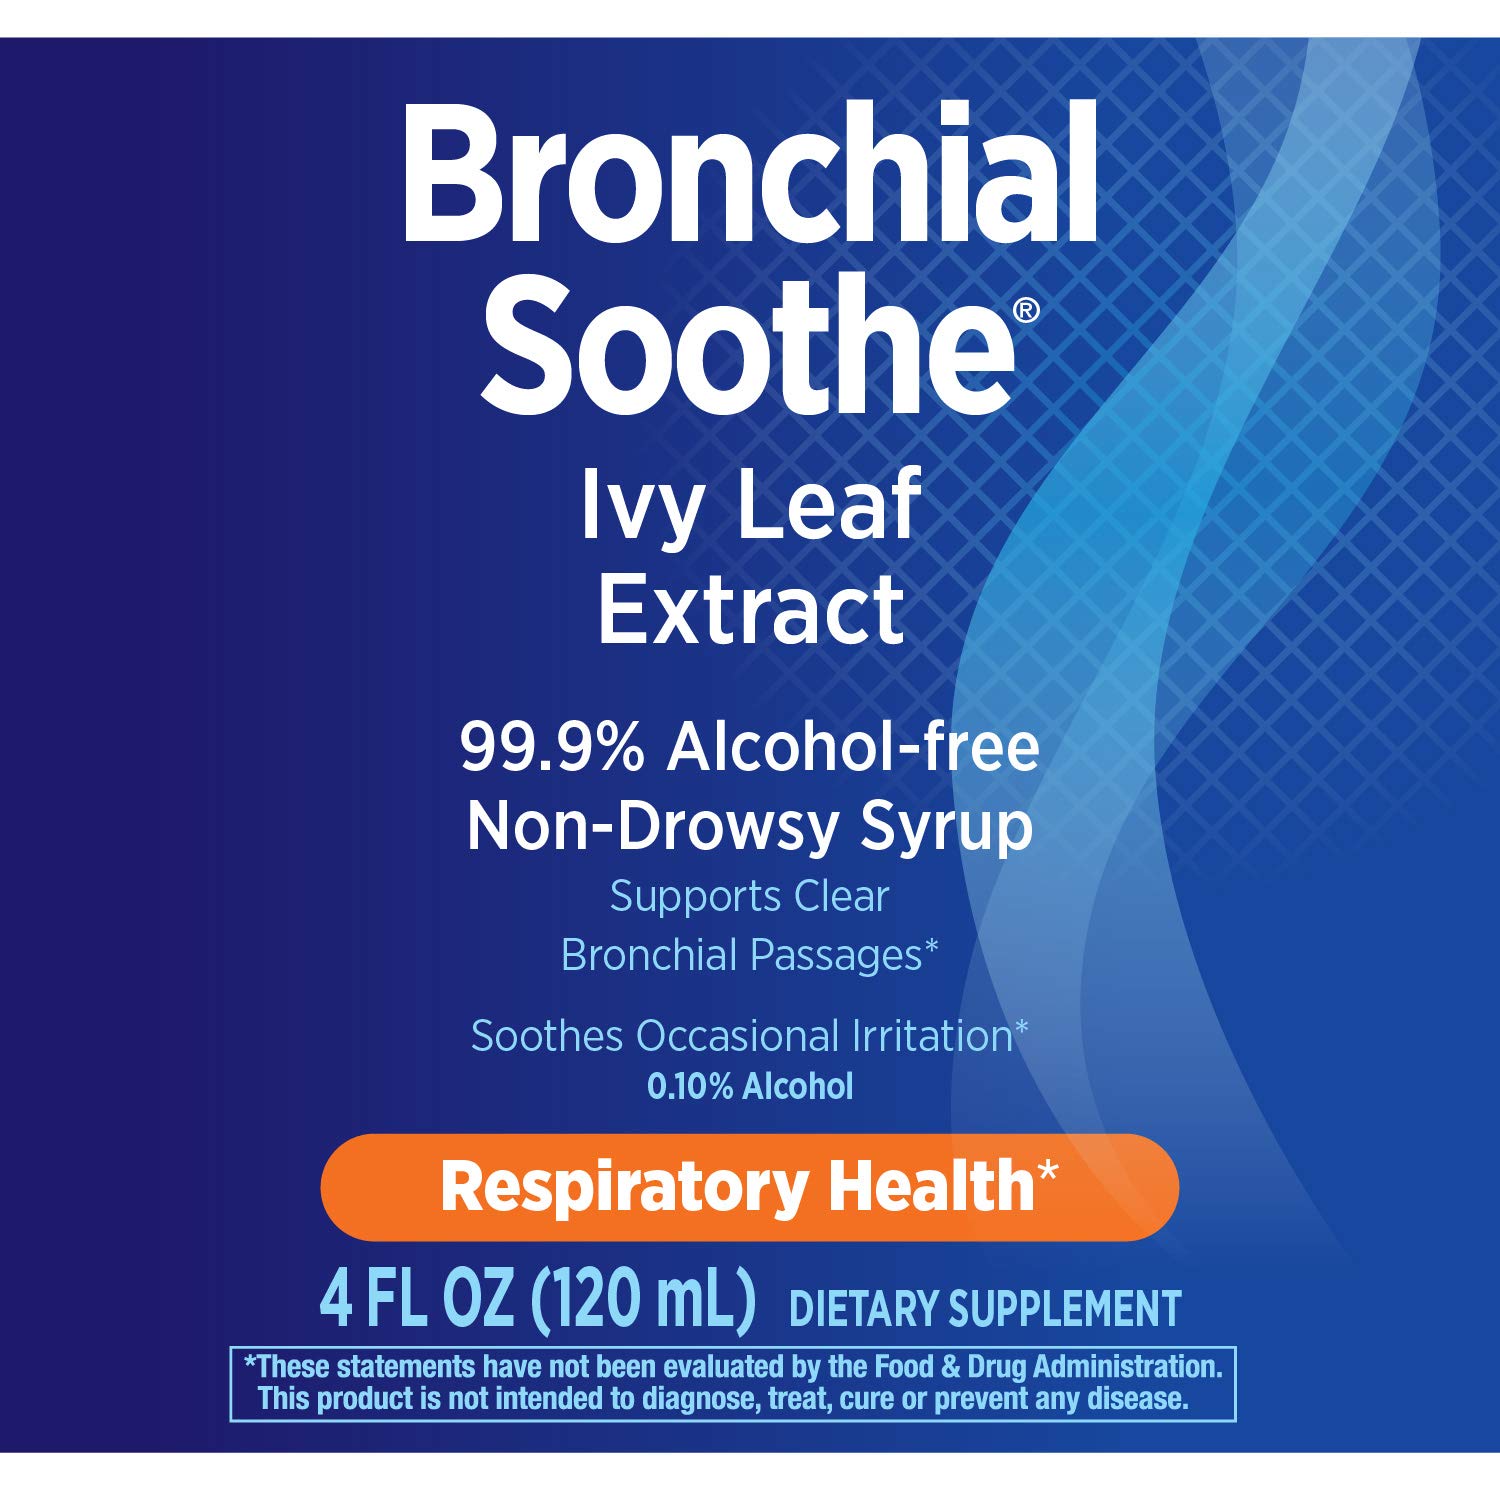 Nature's Way Bronchial Soothe Ivy Leaf 99.9% Alcohol-free Non-Drowsy Syrup, 120 ML (4 Fl Oz.)